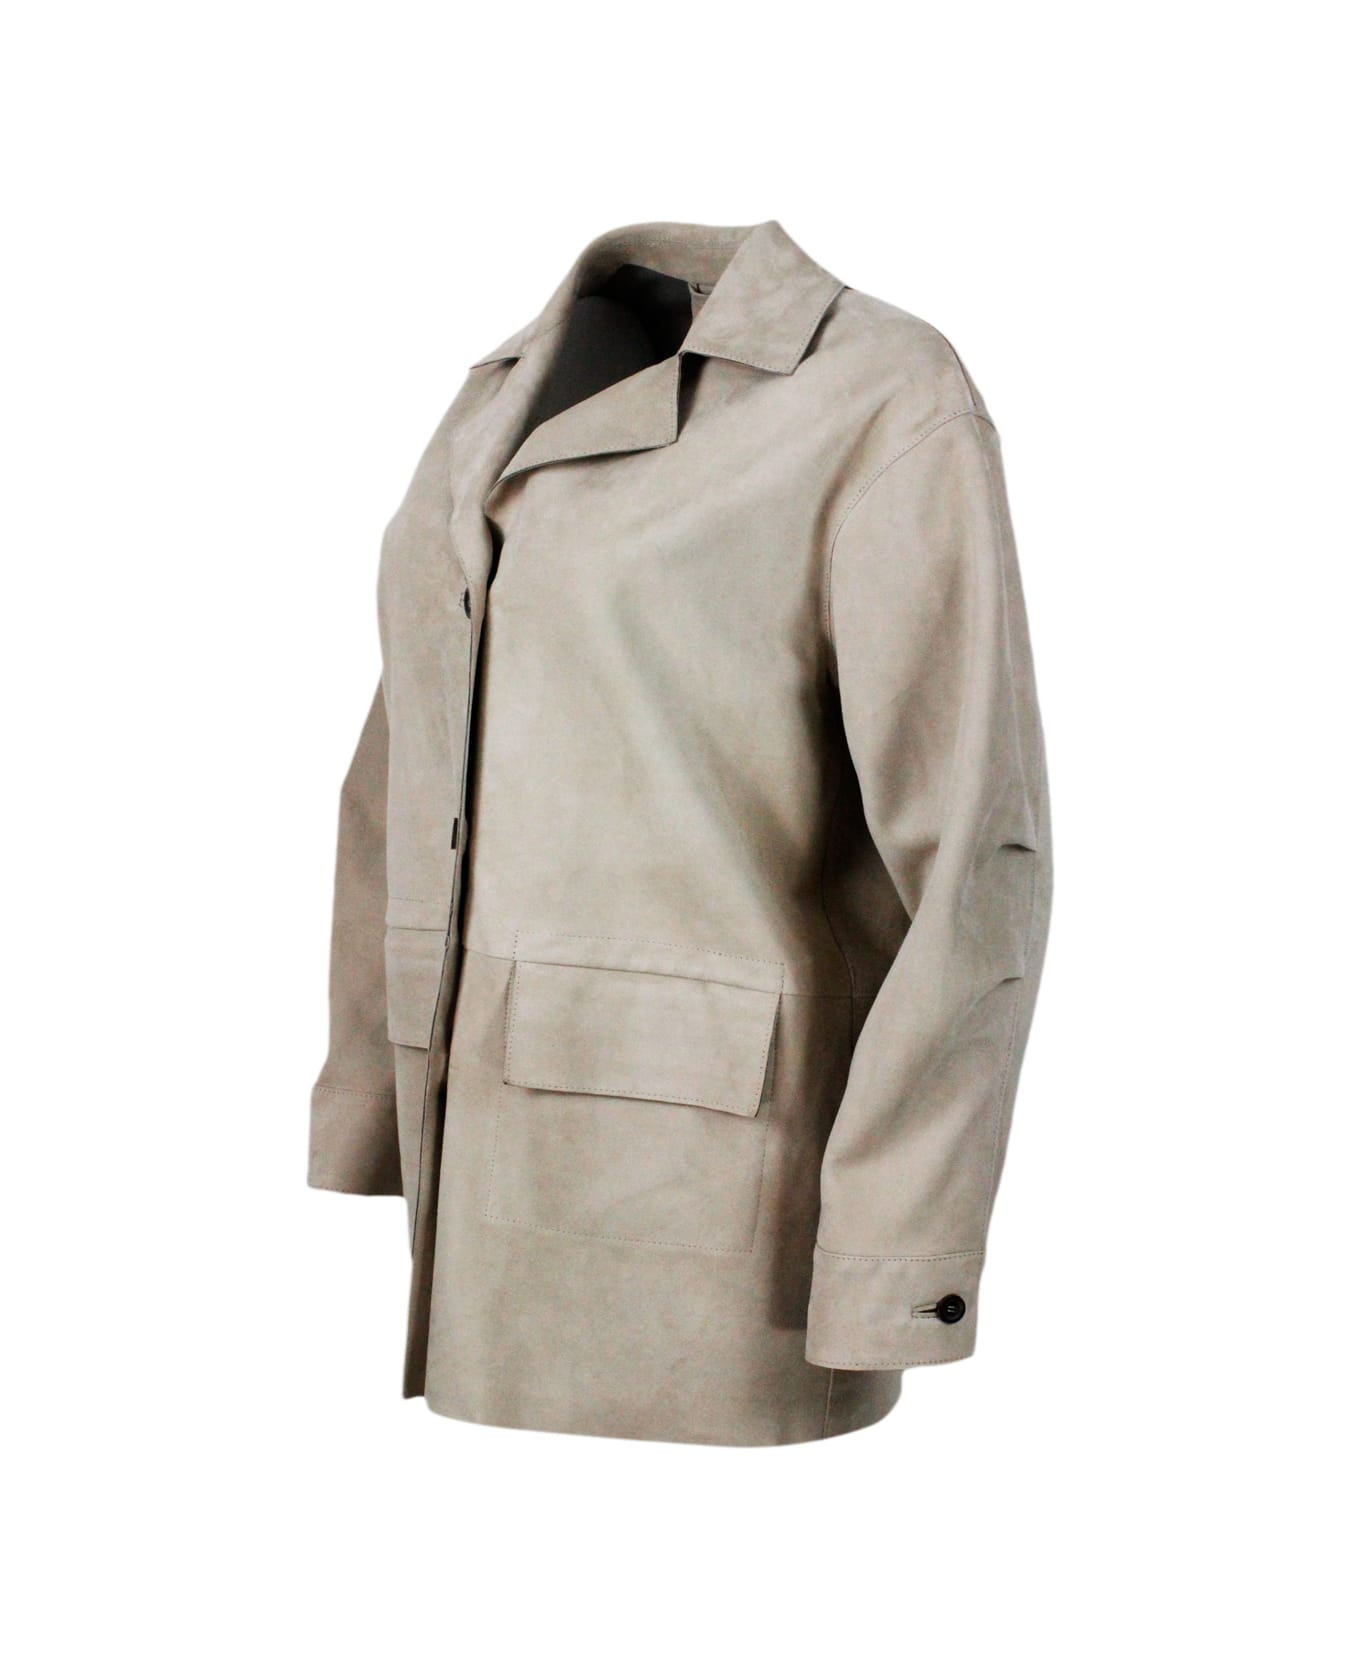 Malo Relaxed Fit Soft Suede Jacket With Patch Pockets And Three-button Closure. - Beige